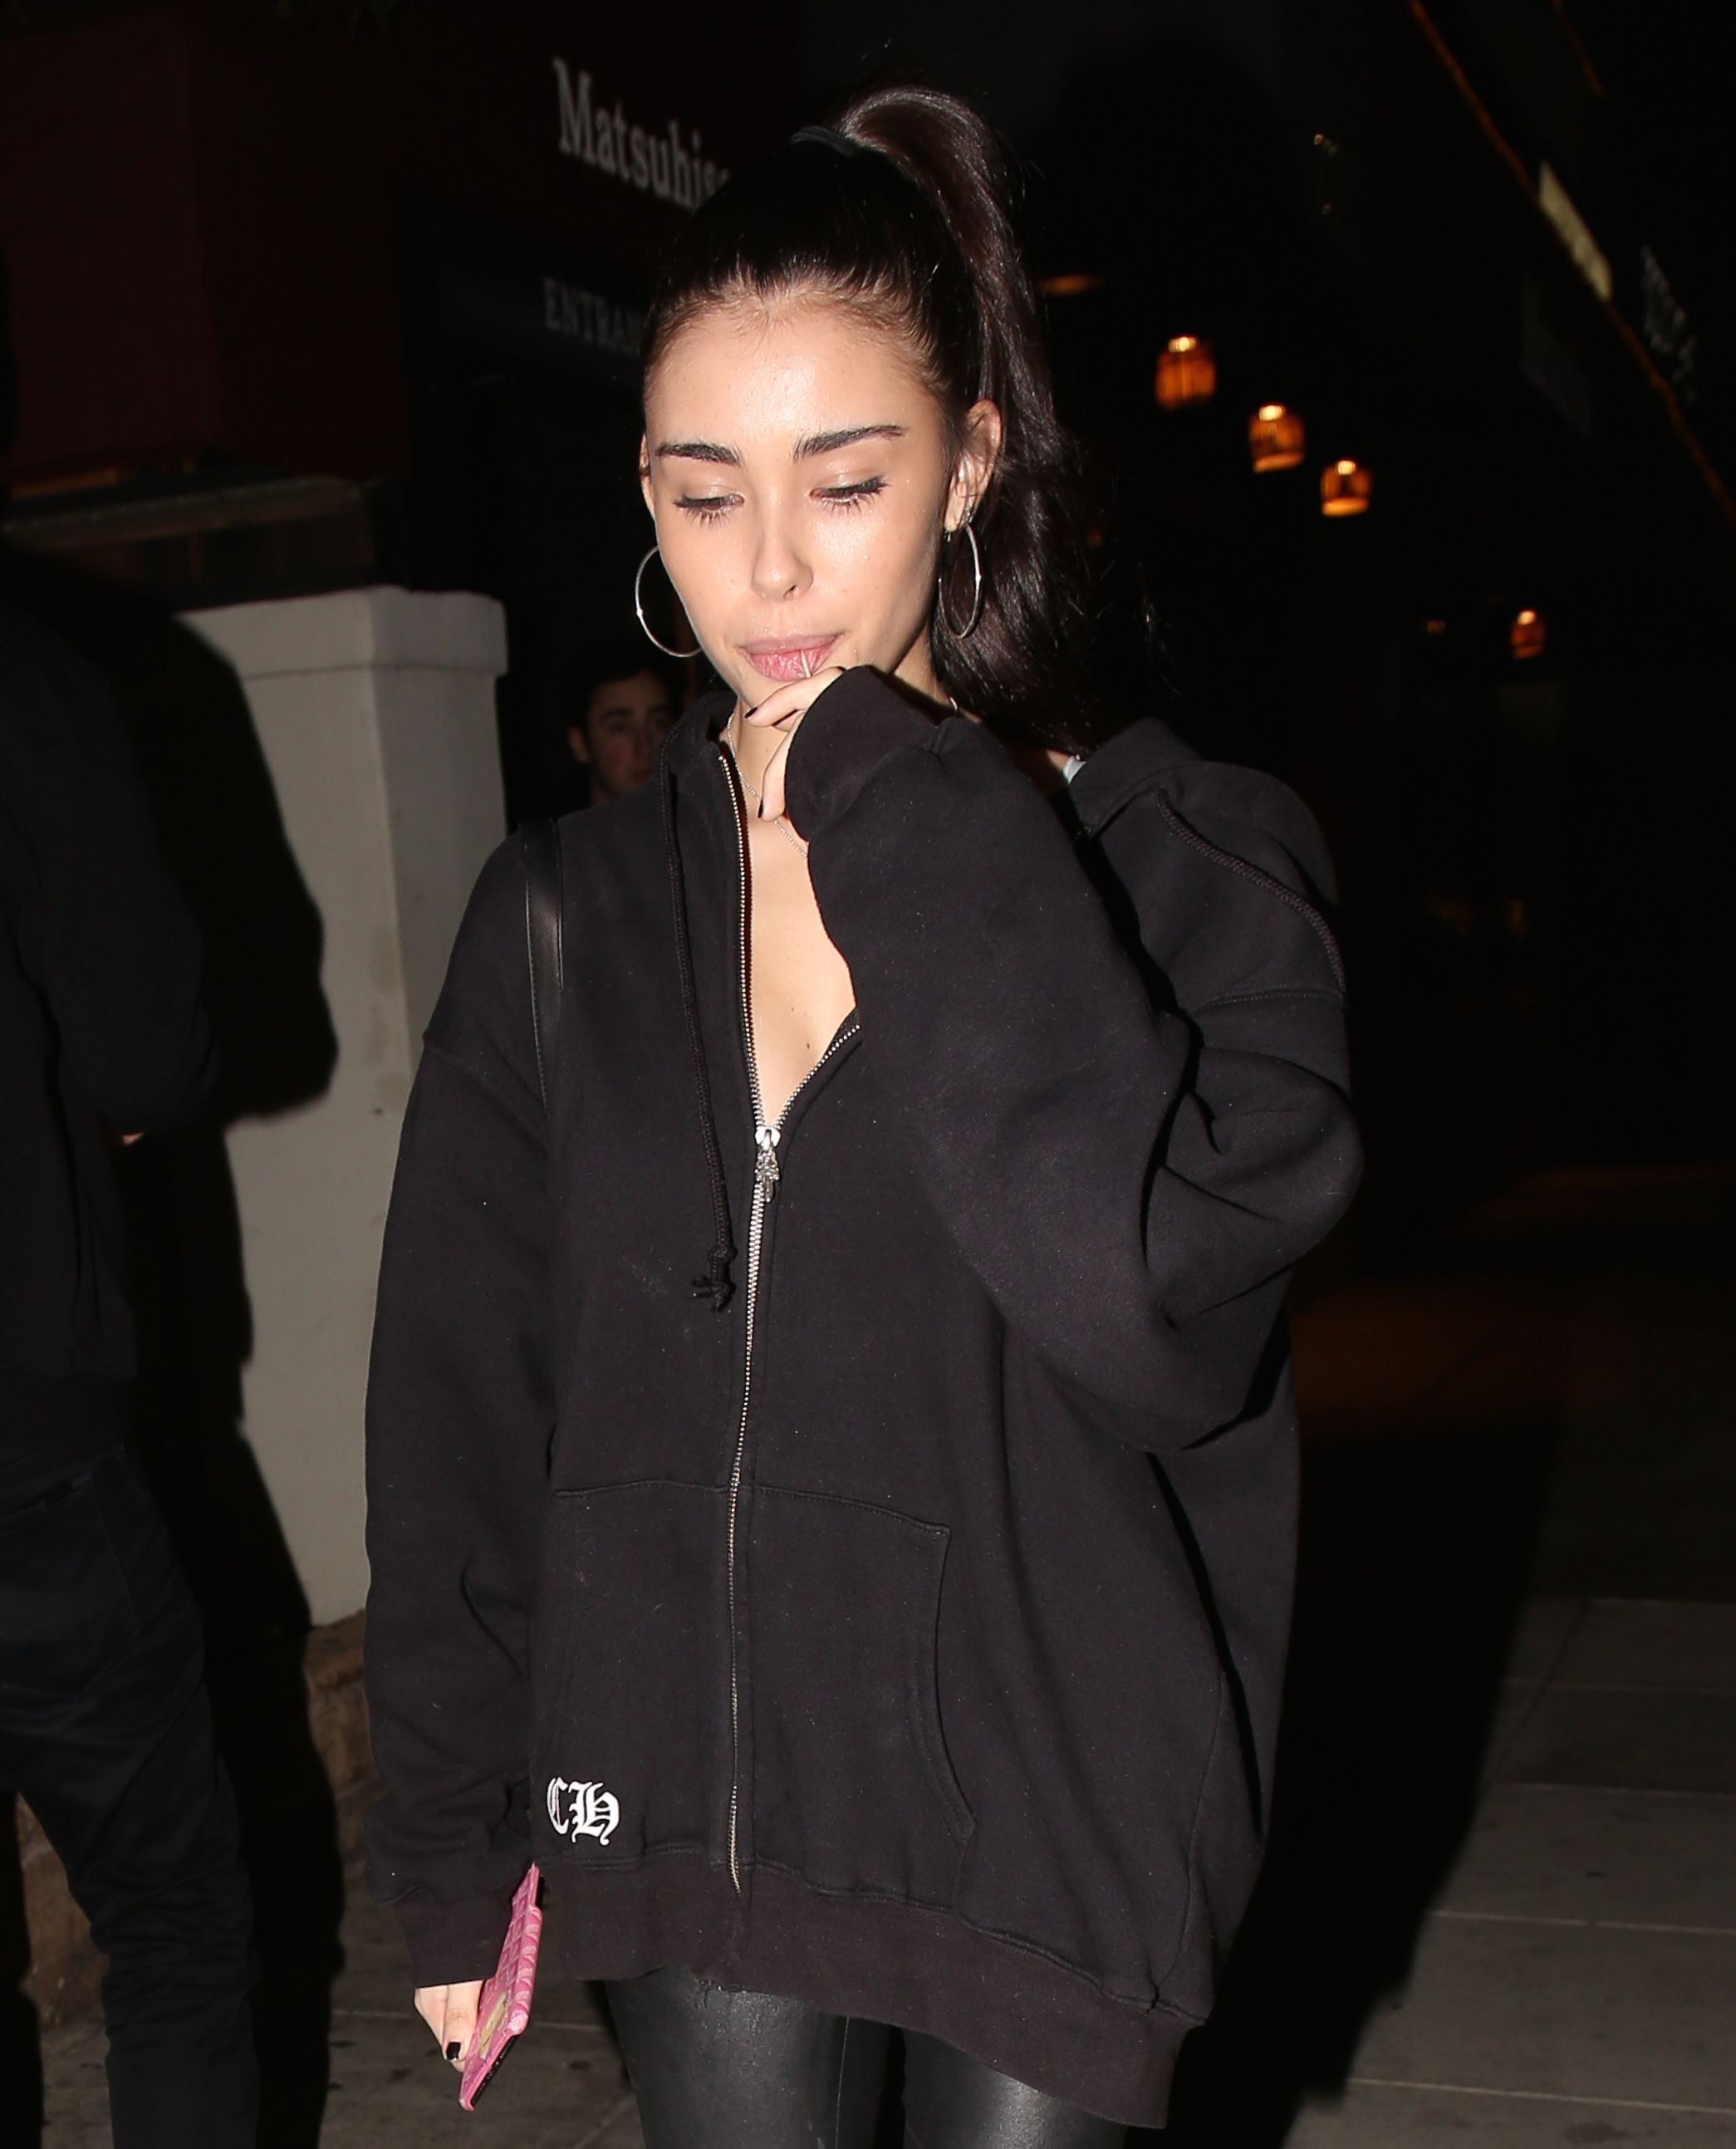 Madison Beer exits Matsuhisa after having a girls night out